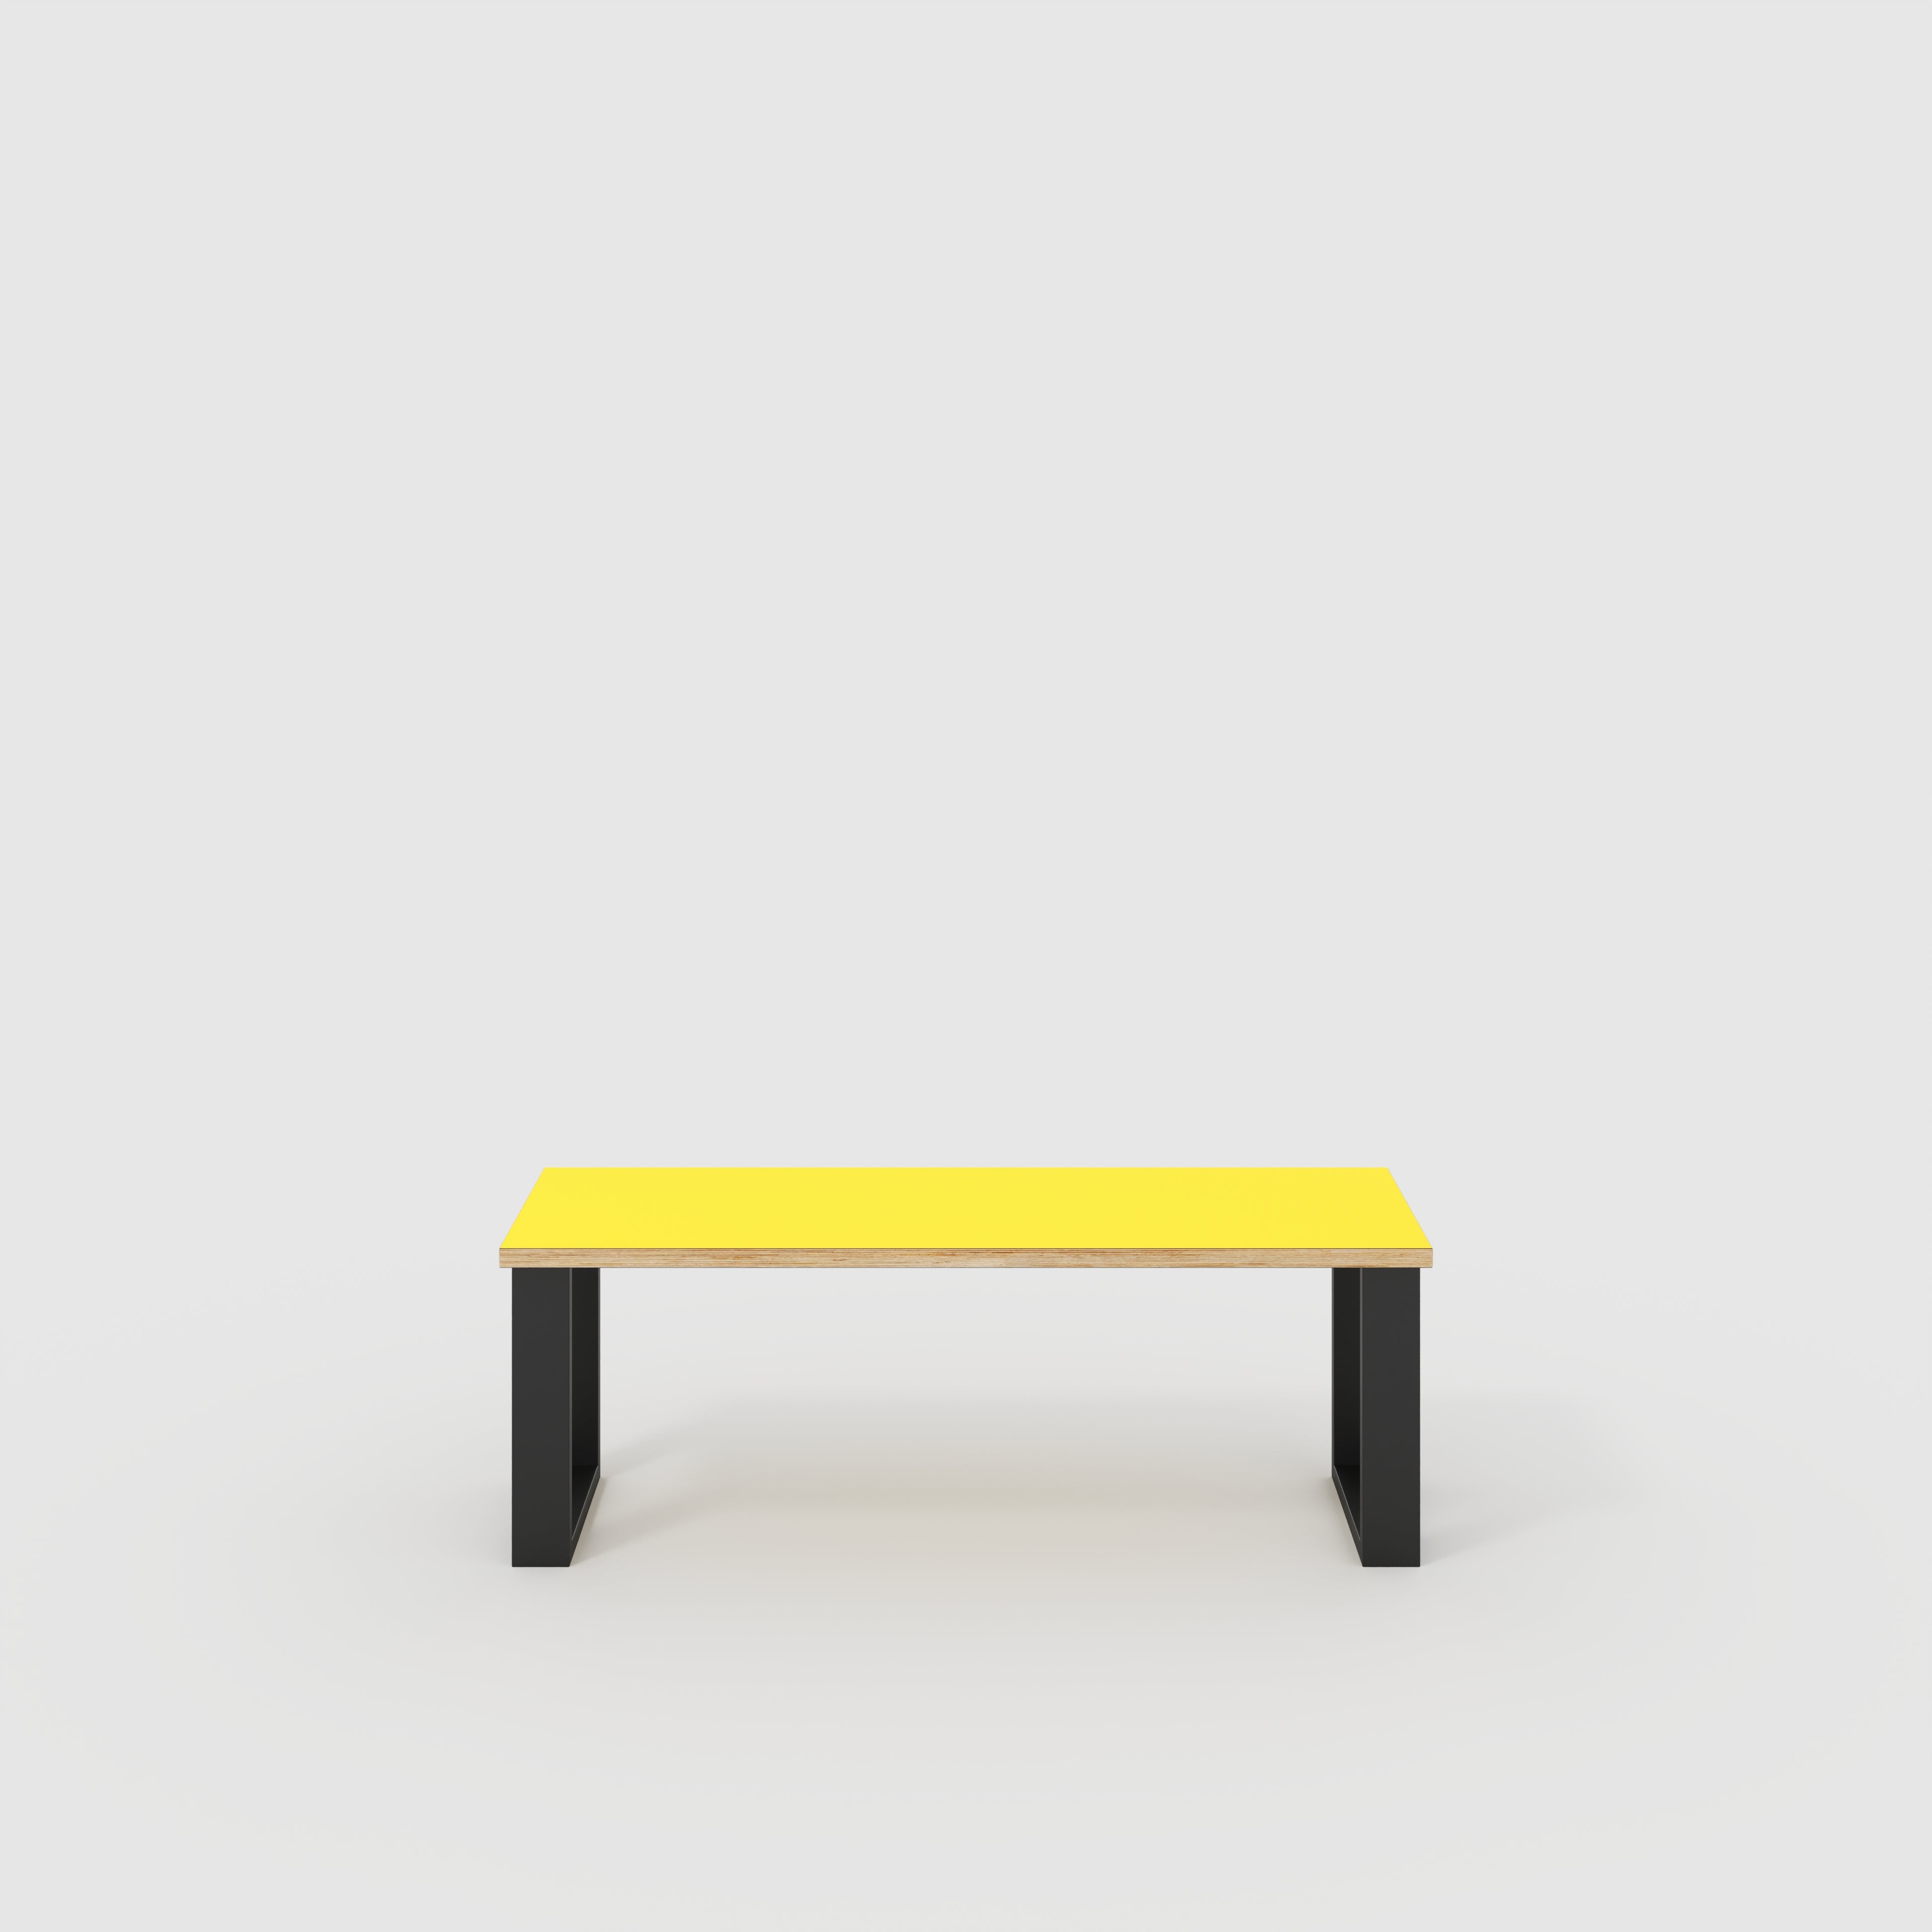 Bench Seat with Black Industrial Legs - Formica Chrome Yellow - 1200(w) x 400(d)